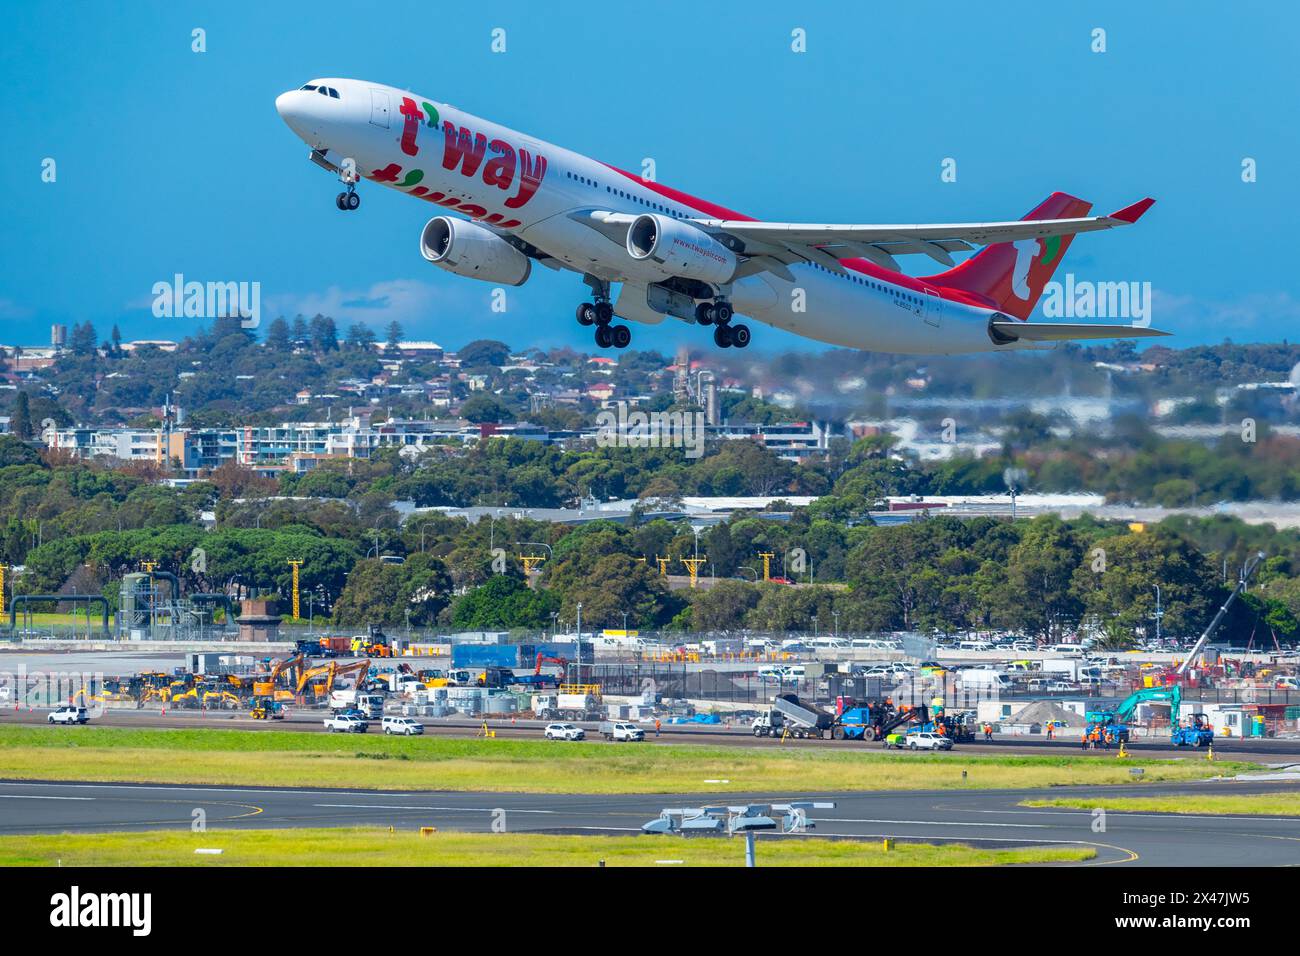 Sydney (Kingsford Smith) Airport in Sydney, Australia. Pictured: aircraft movements. Stock Photo